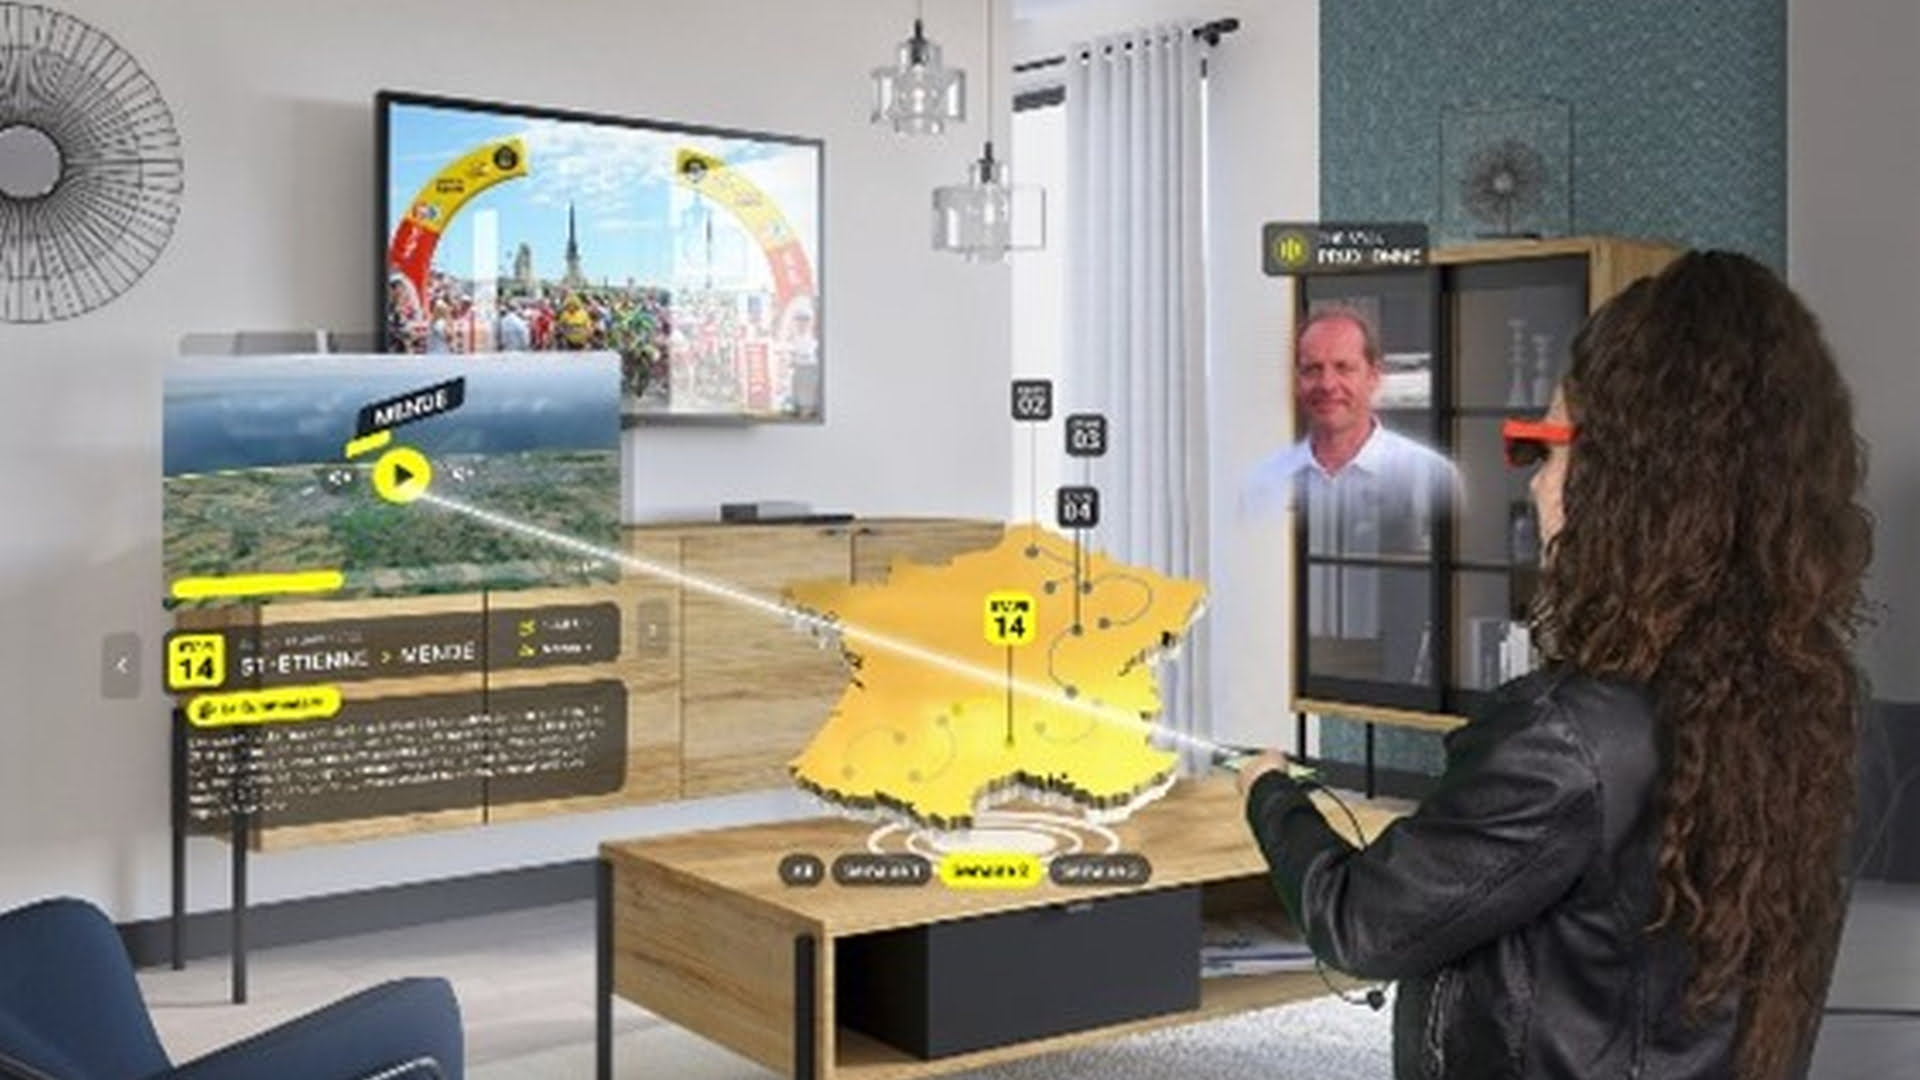 Tour de France 2022 gets augmented reality experience